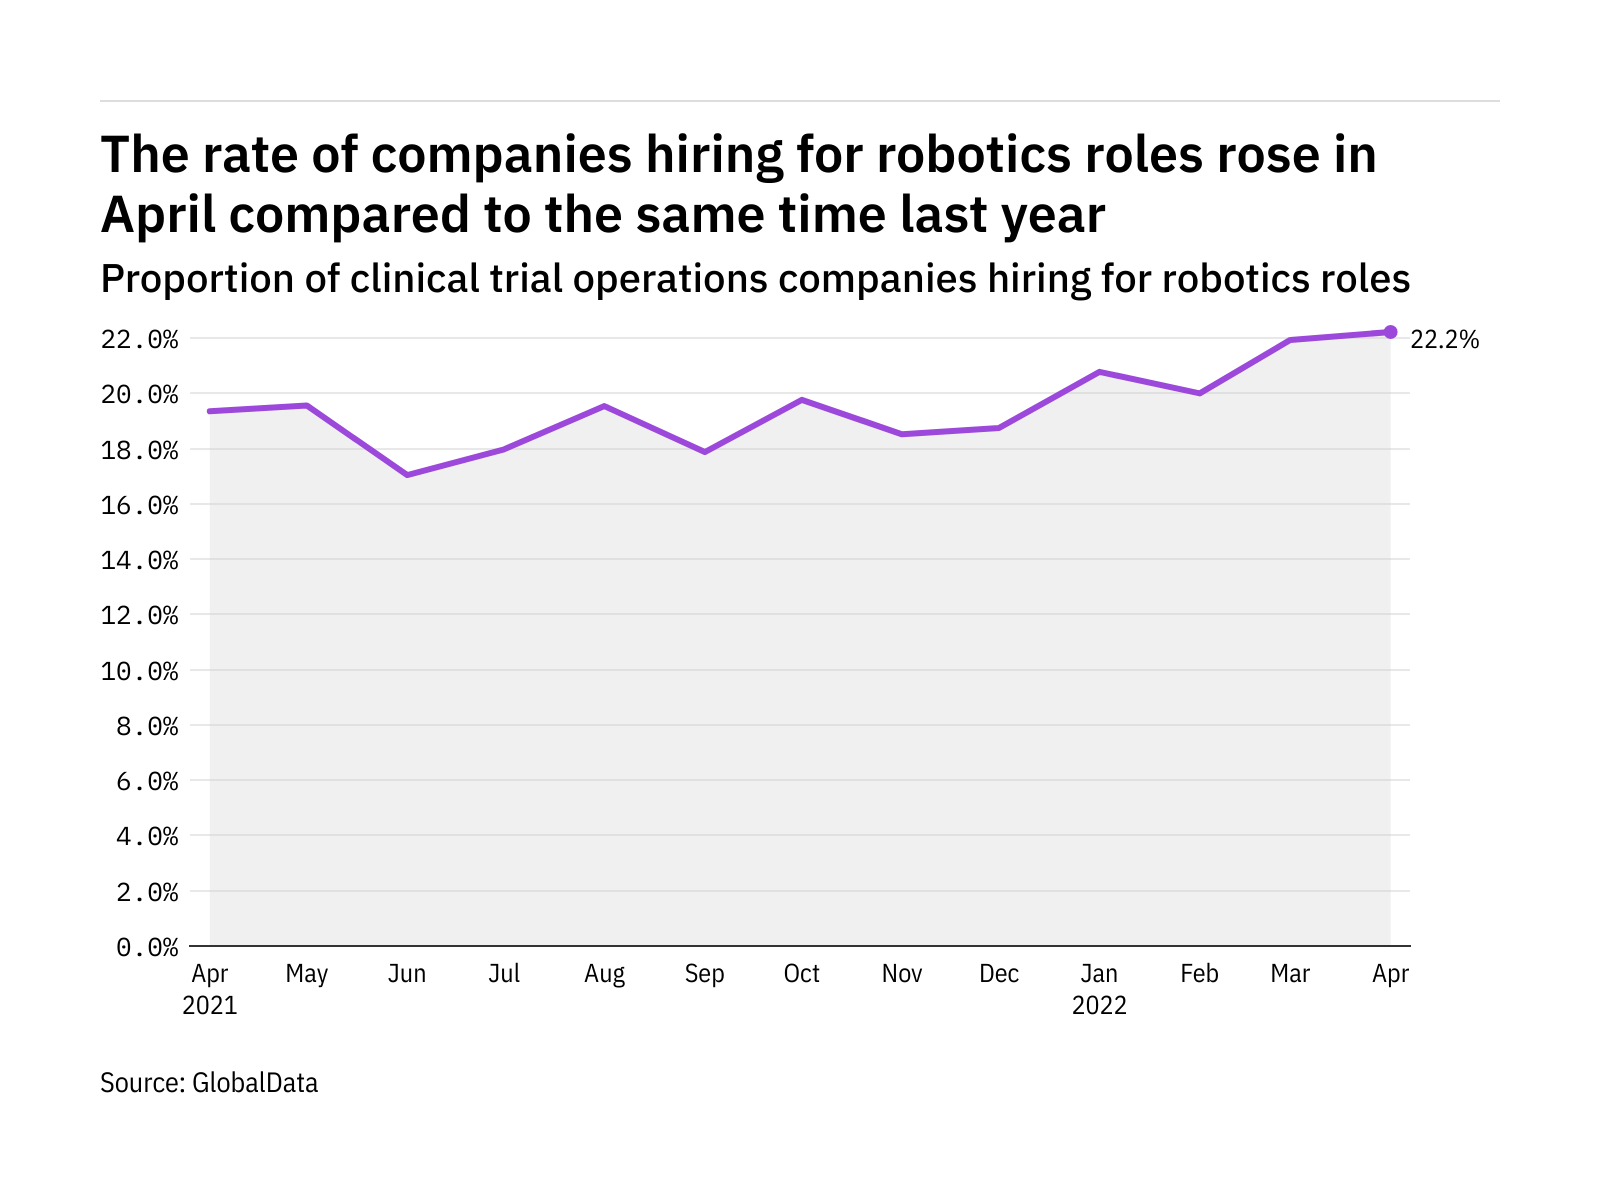 Robotics hiring levels in clinical trials rose to a year-high in April 2022